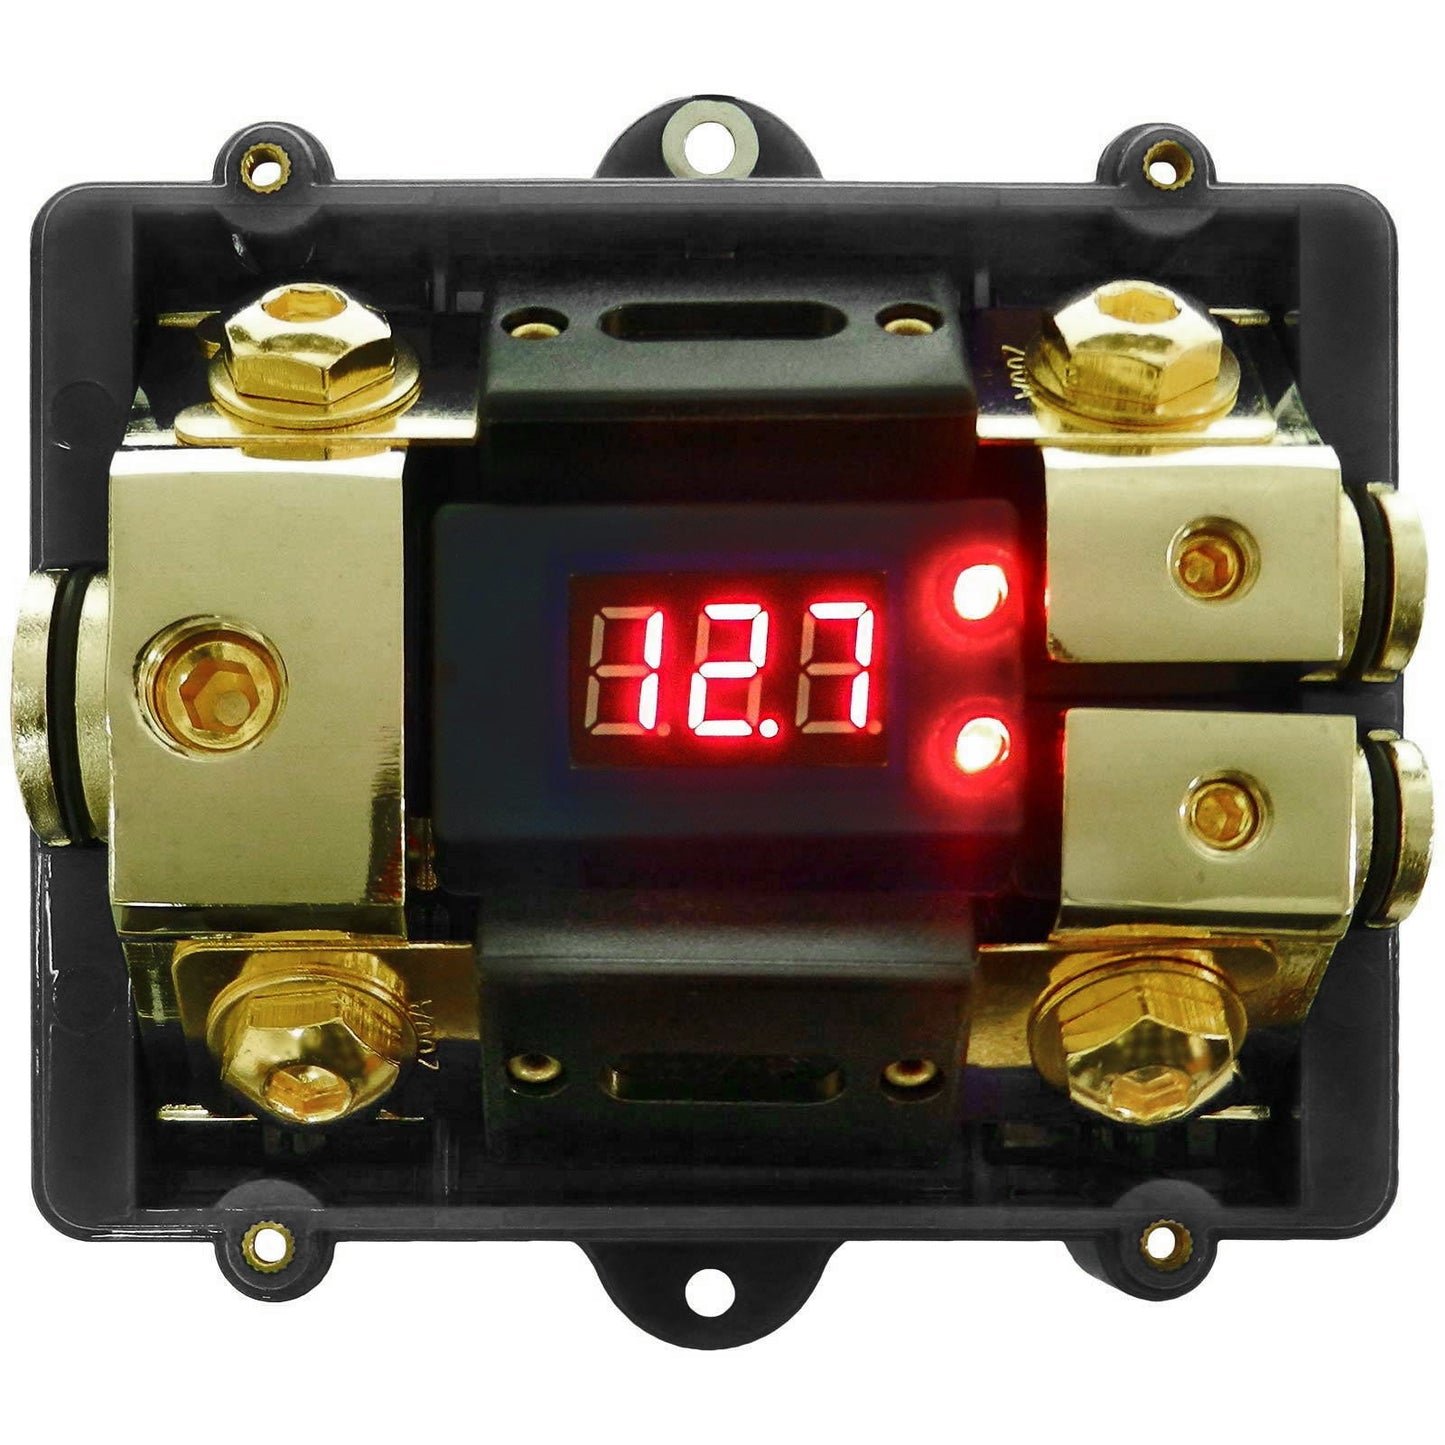 LED Display 1x0 IN 2x4GA OUT Distribution Block Fuse Holder